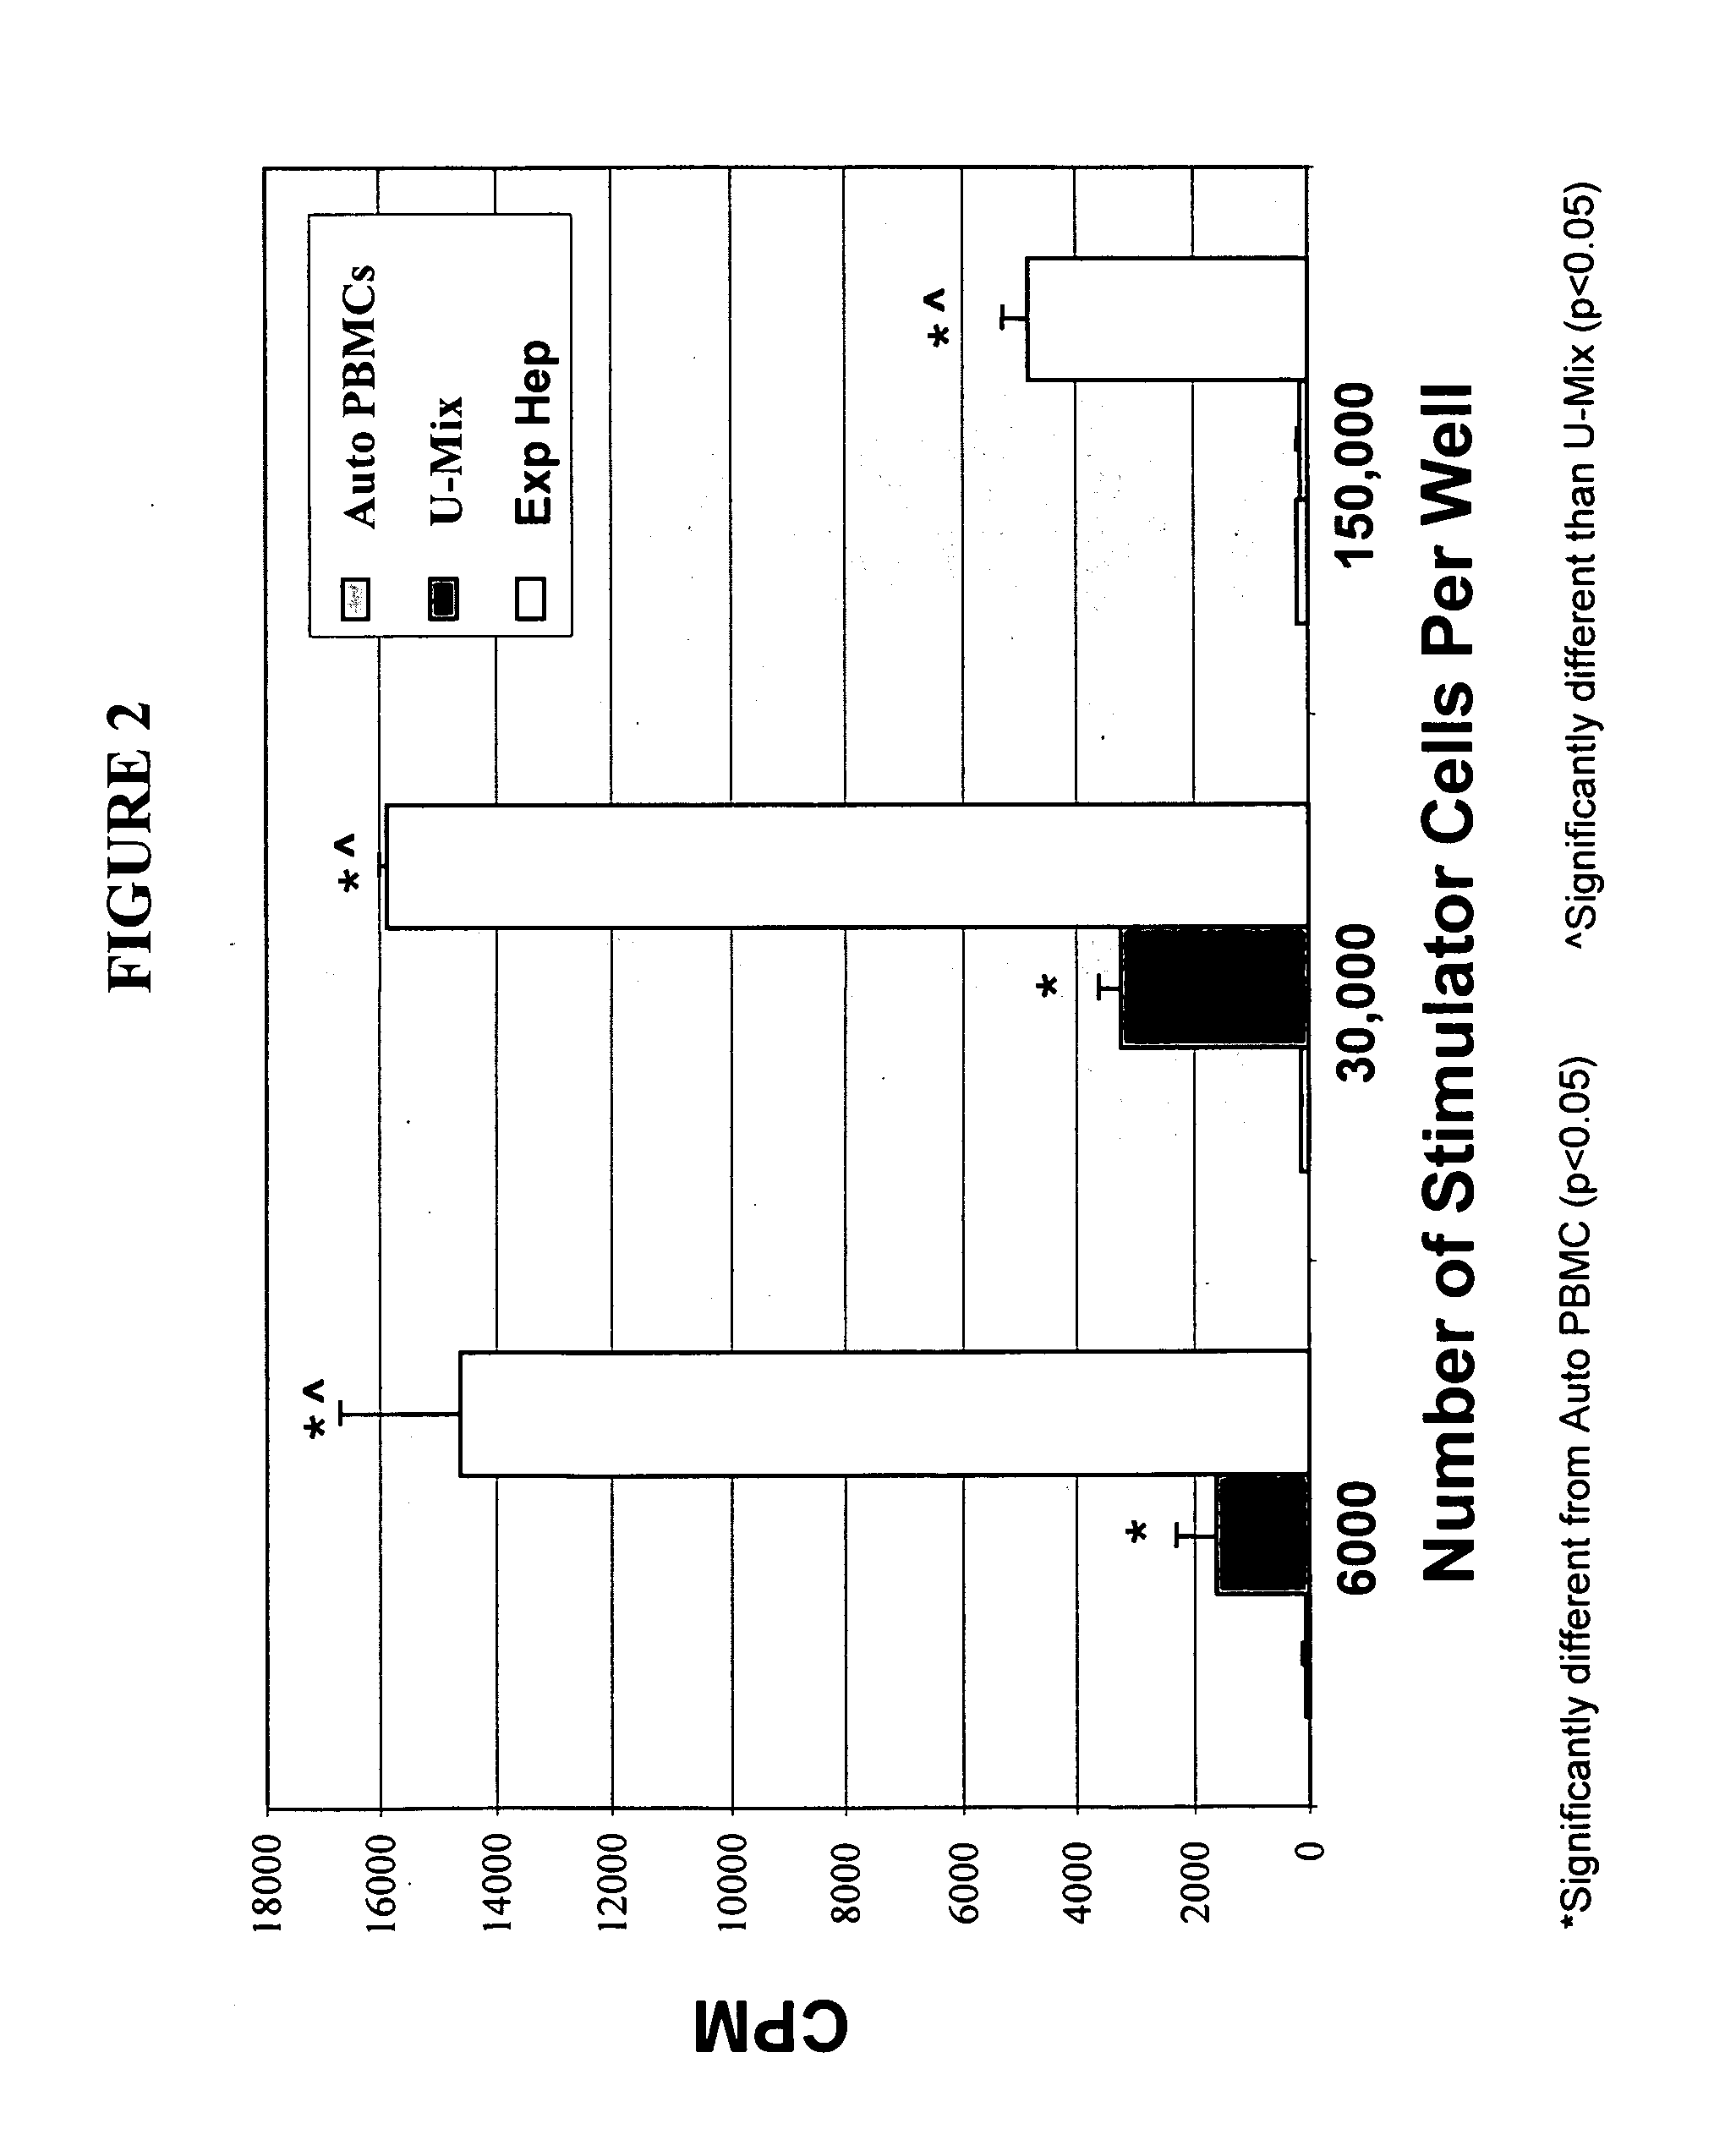 Method of using hepatic progenitors in treating liver dysfunction